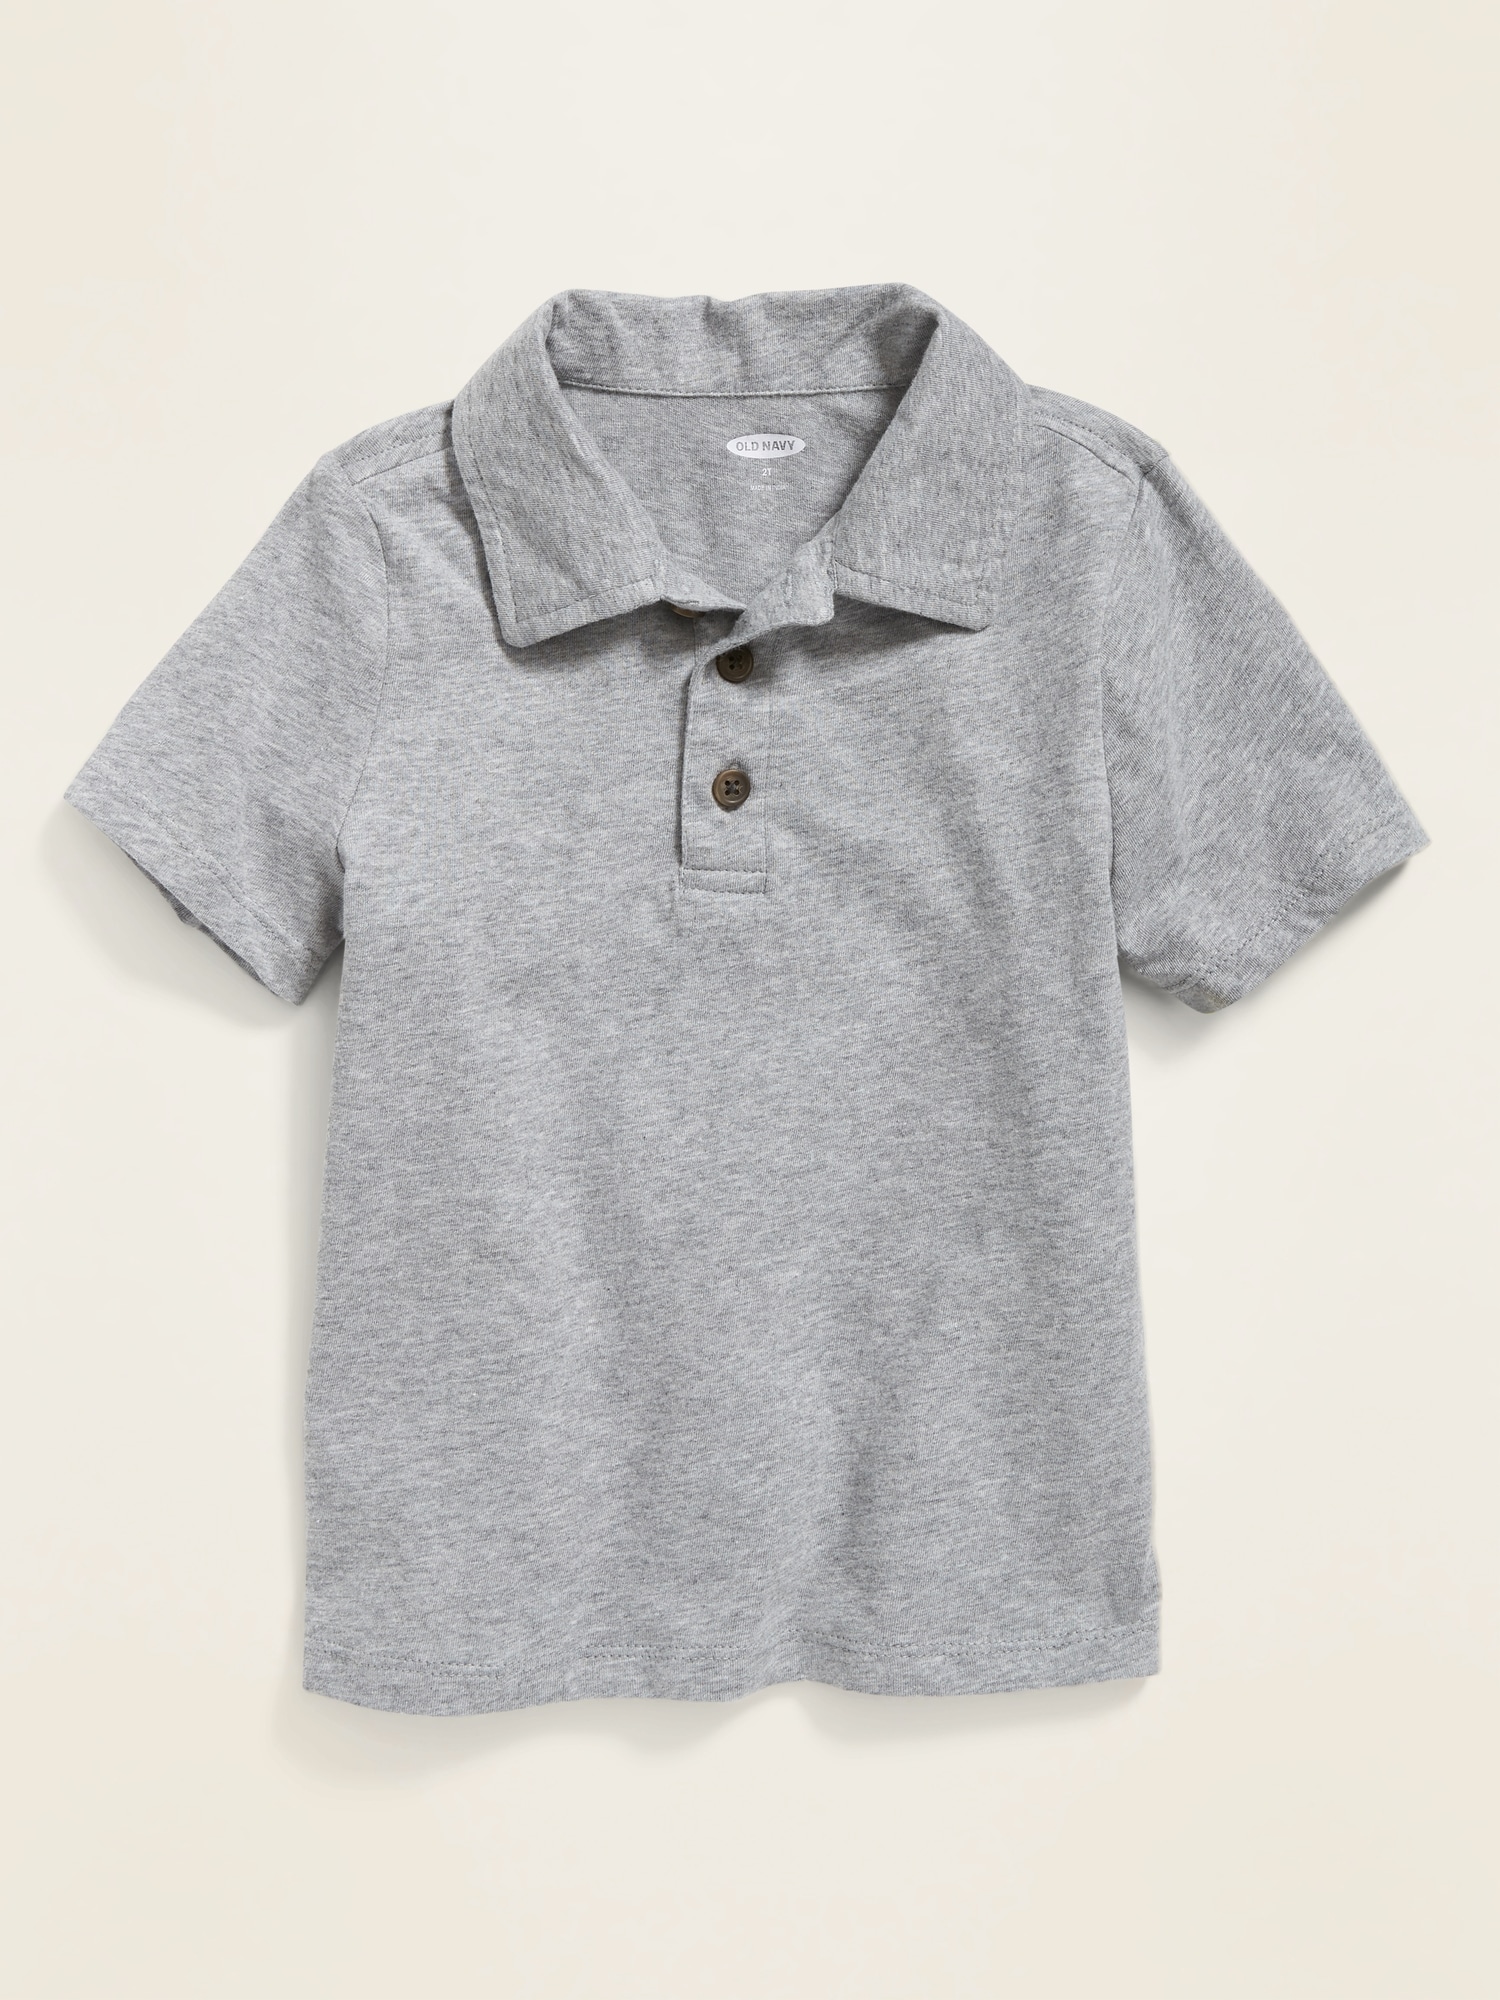 Jersey Short-Sleeve Polo for Toddler Boys | Old Navy